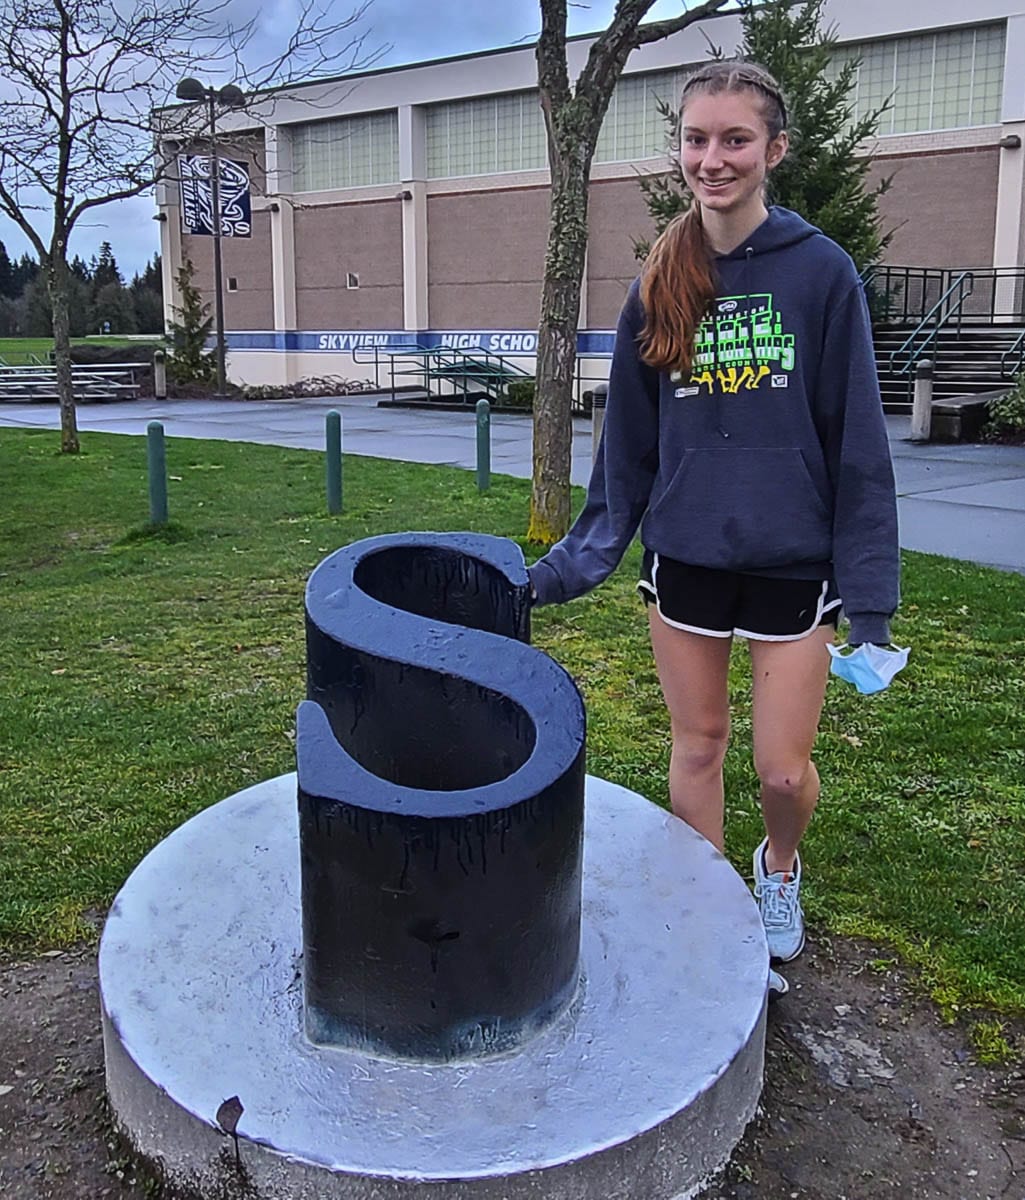 Phoebe Abbruzzese of Skyview didn’t just run while she was training for cross country. She created some works of art on a running app to share with her teammates. Photo by Paul Valencia